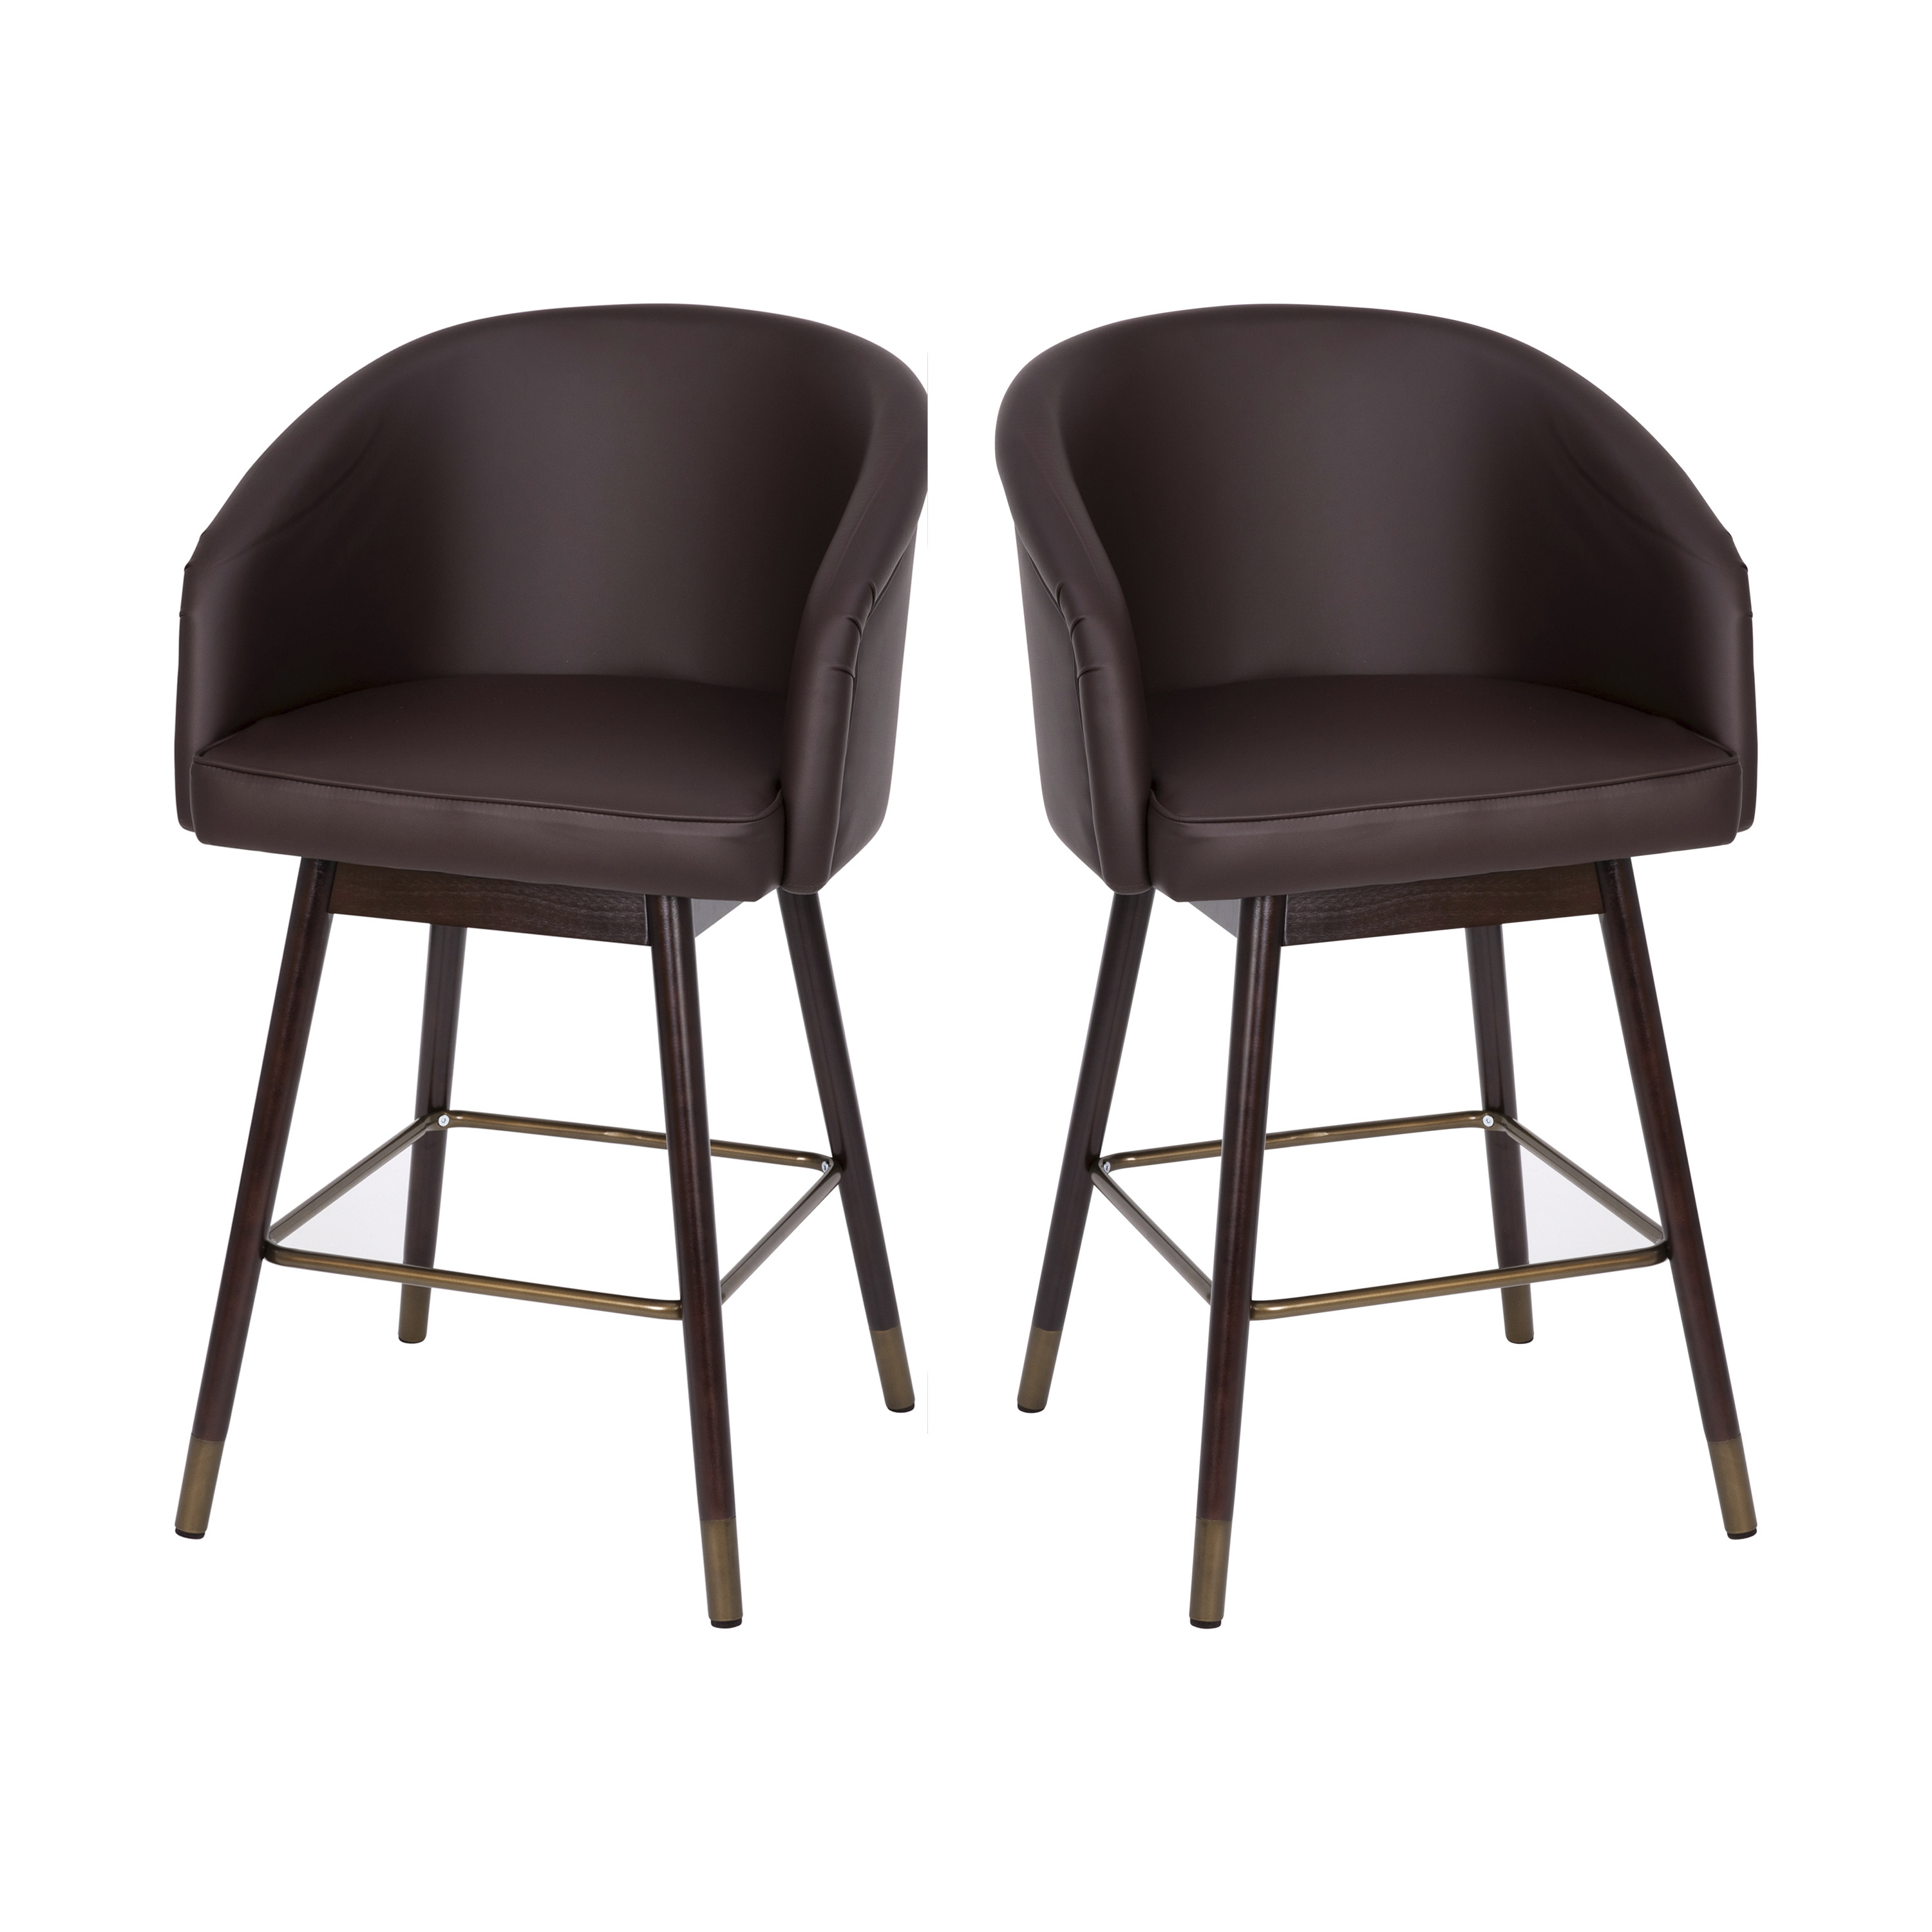 Flash Furniture 2-AY-1928-26-BR-GG Margo 26" Commercial Grade Mid-Back Brown LeatherSoft Modern Barstool with Beechwood Legs and Curved Back, Bronze Accents, Set of 2